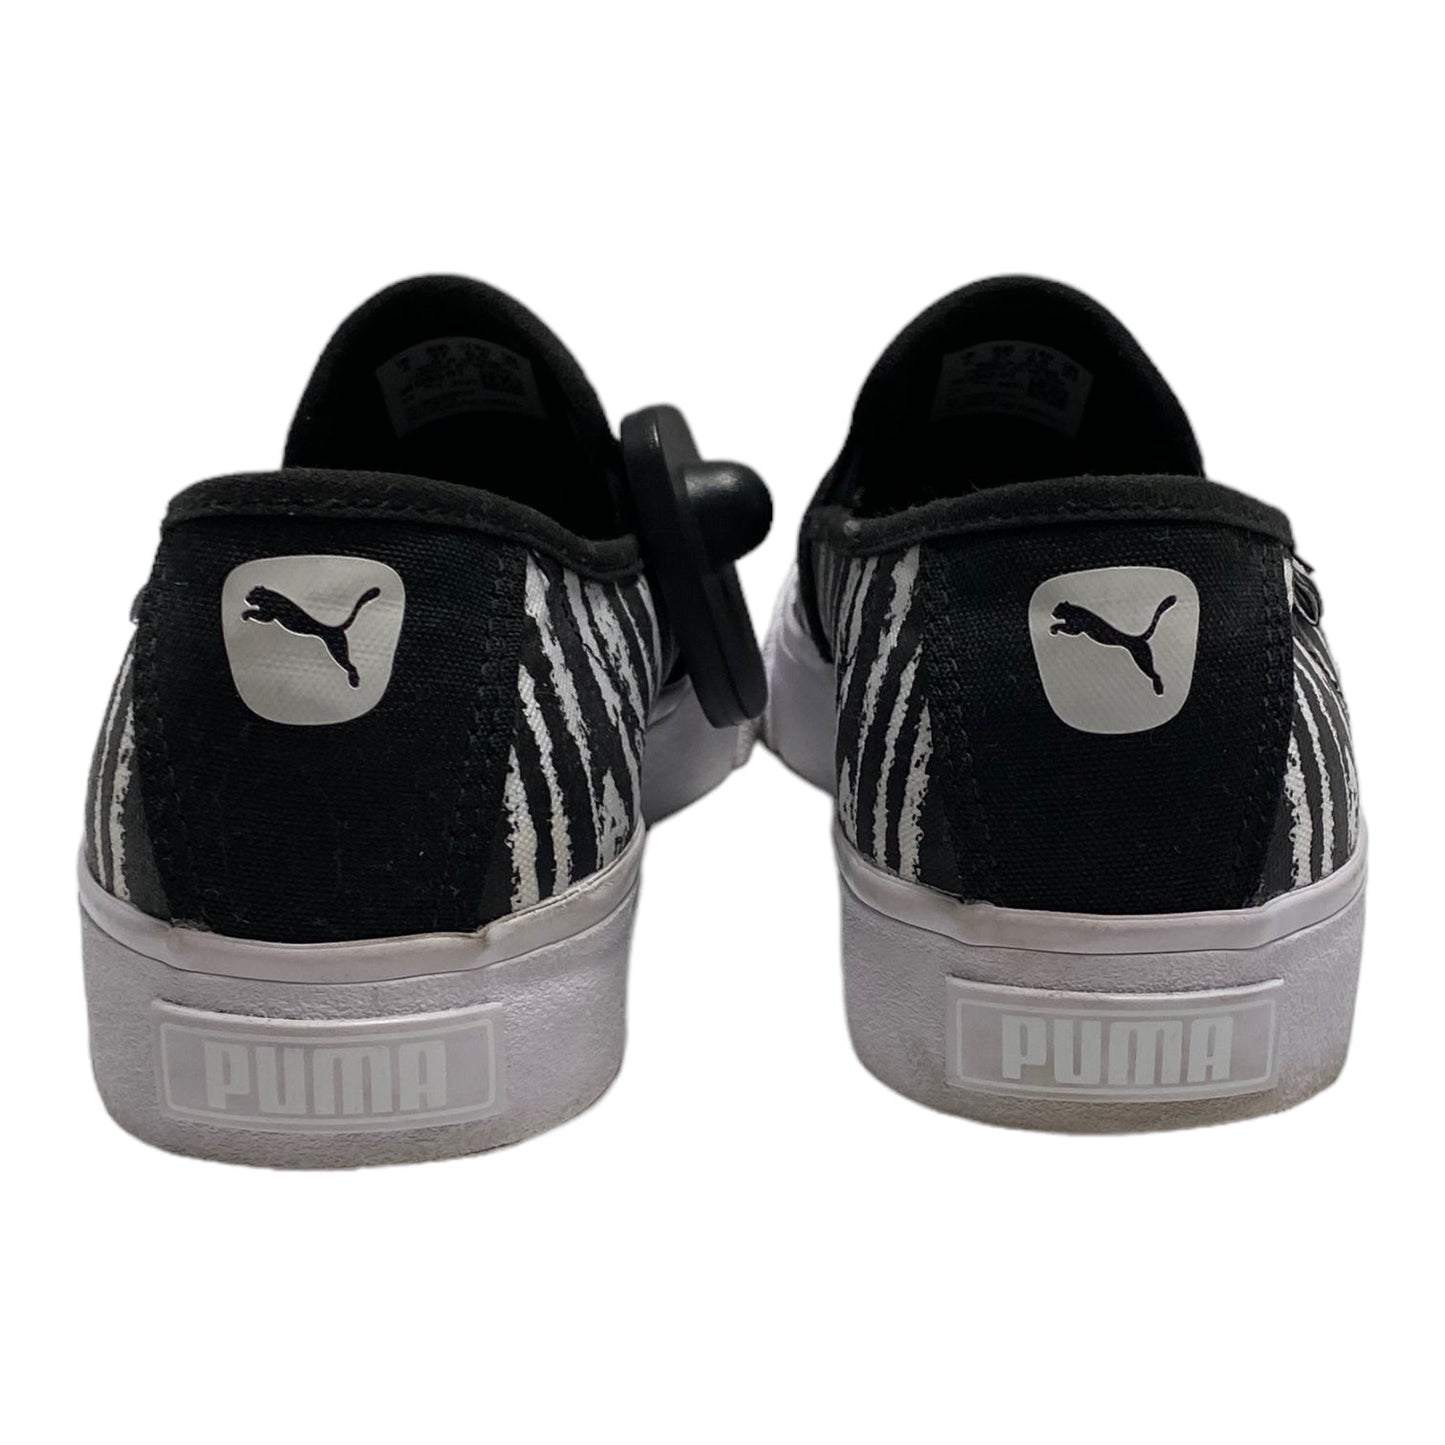 Shoes Sneakers By Puma  Size: 6.5